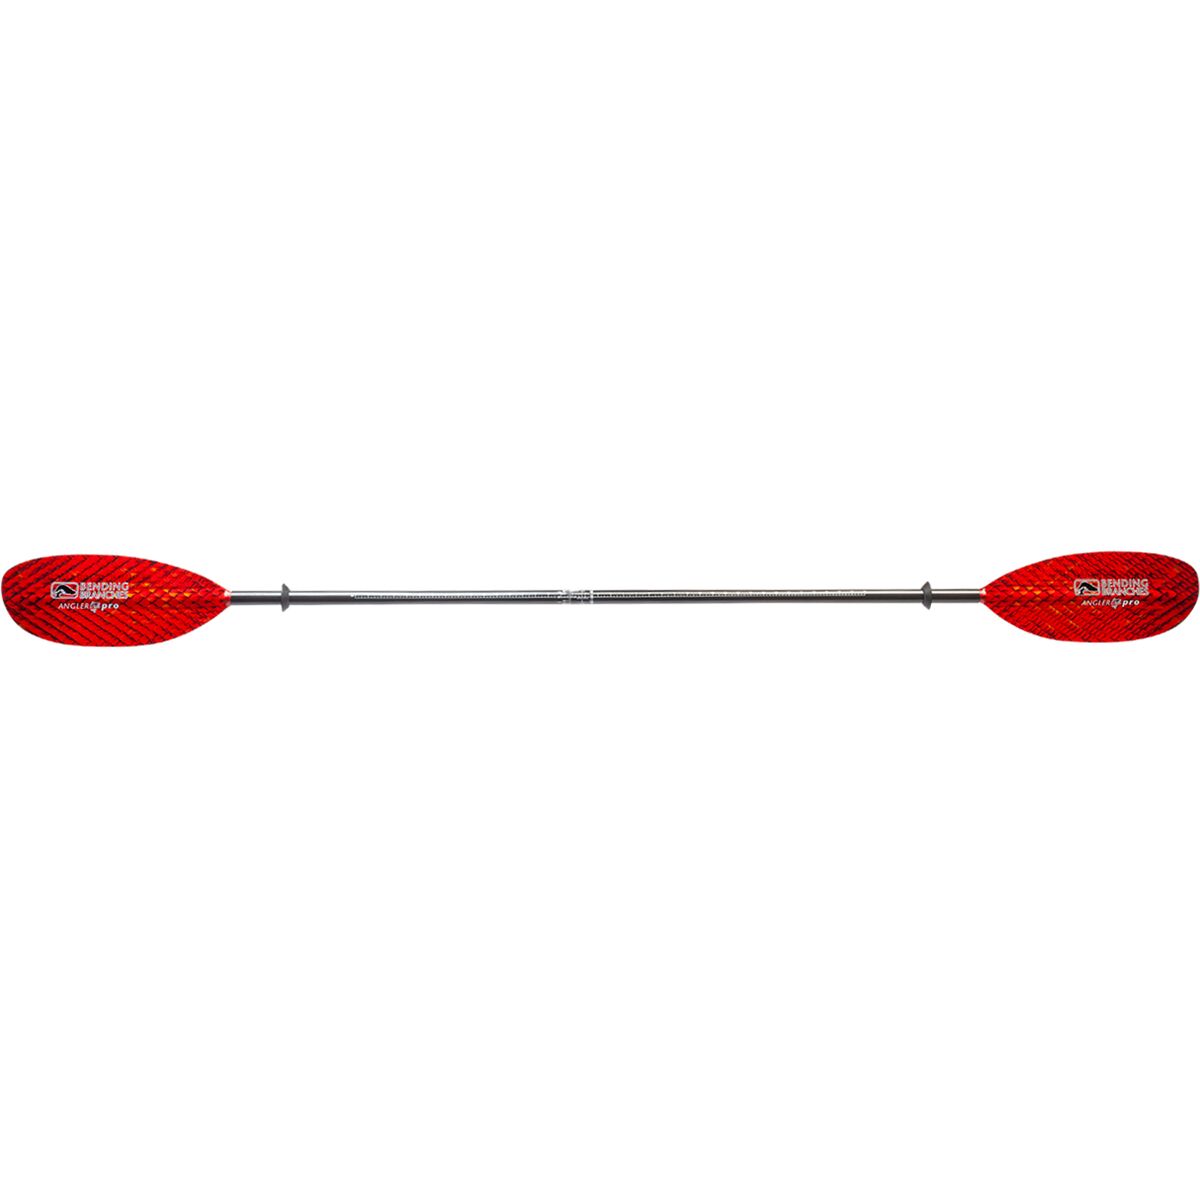 Bending Branches Angler Pro Plus Telescoping Paddle